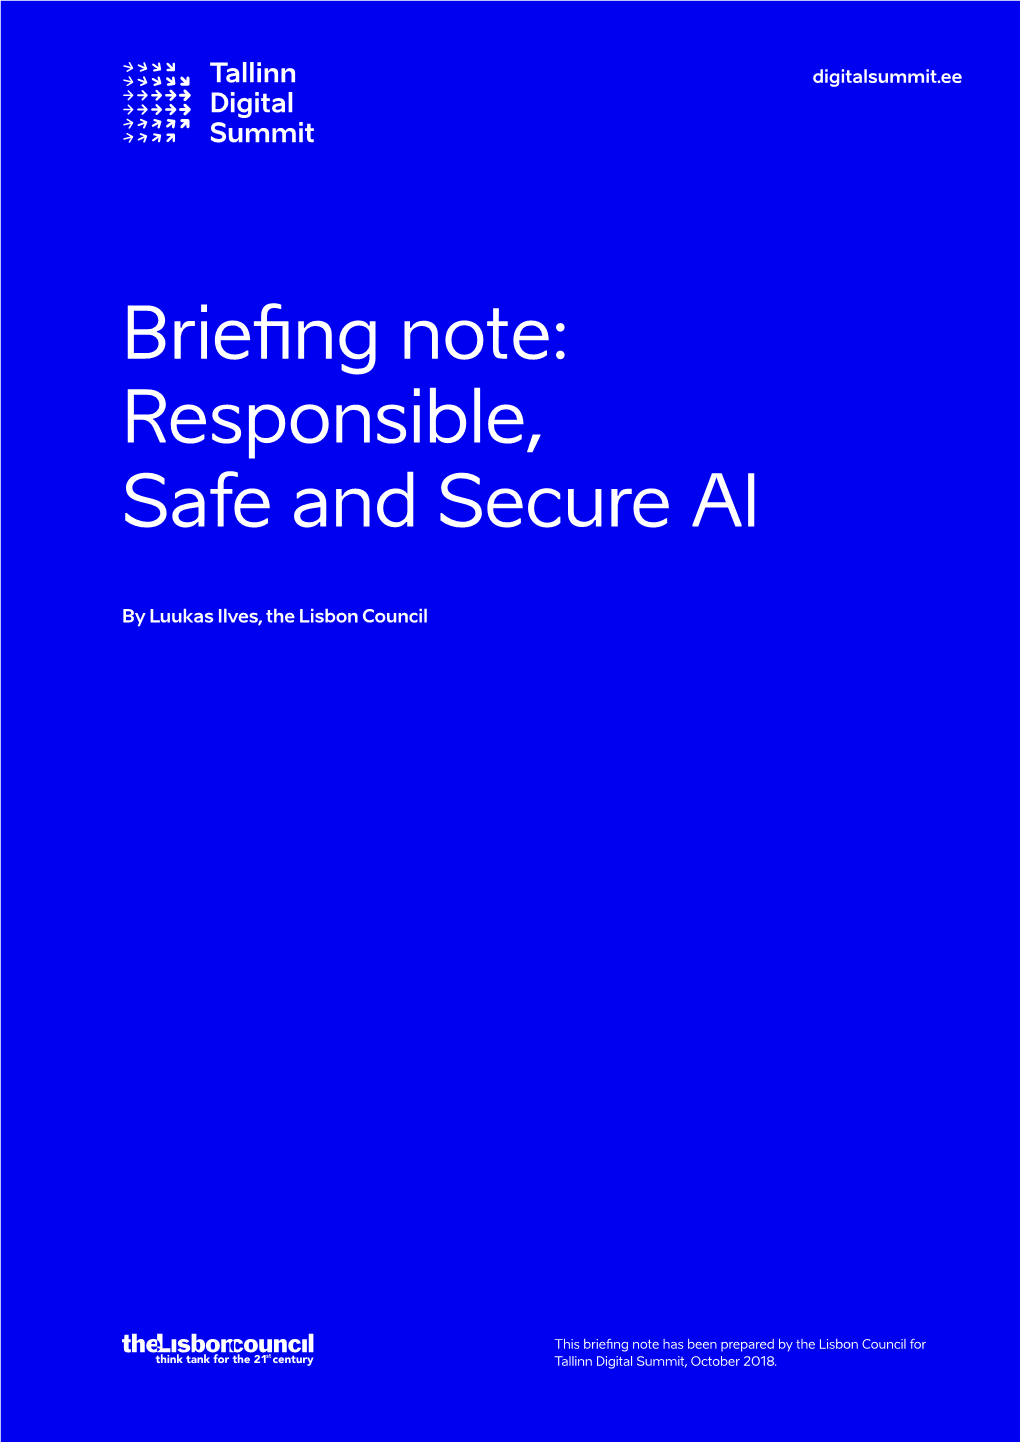 Responsible, Safe and Secure AI